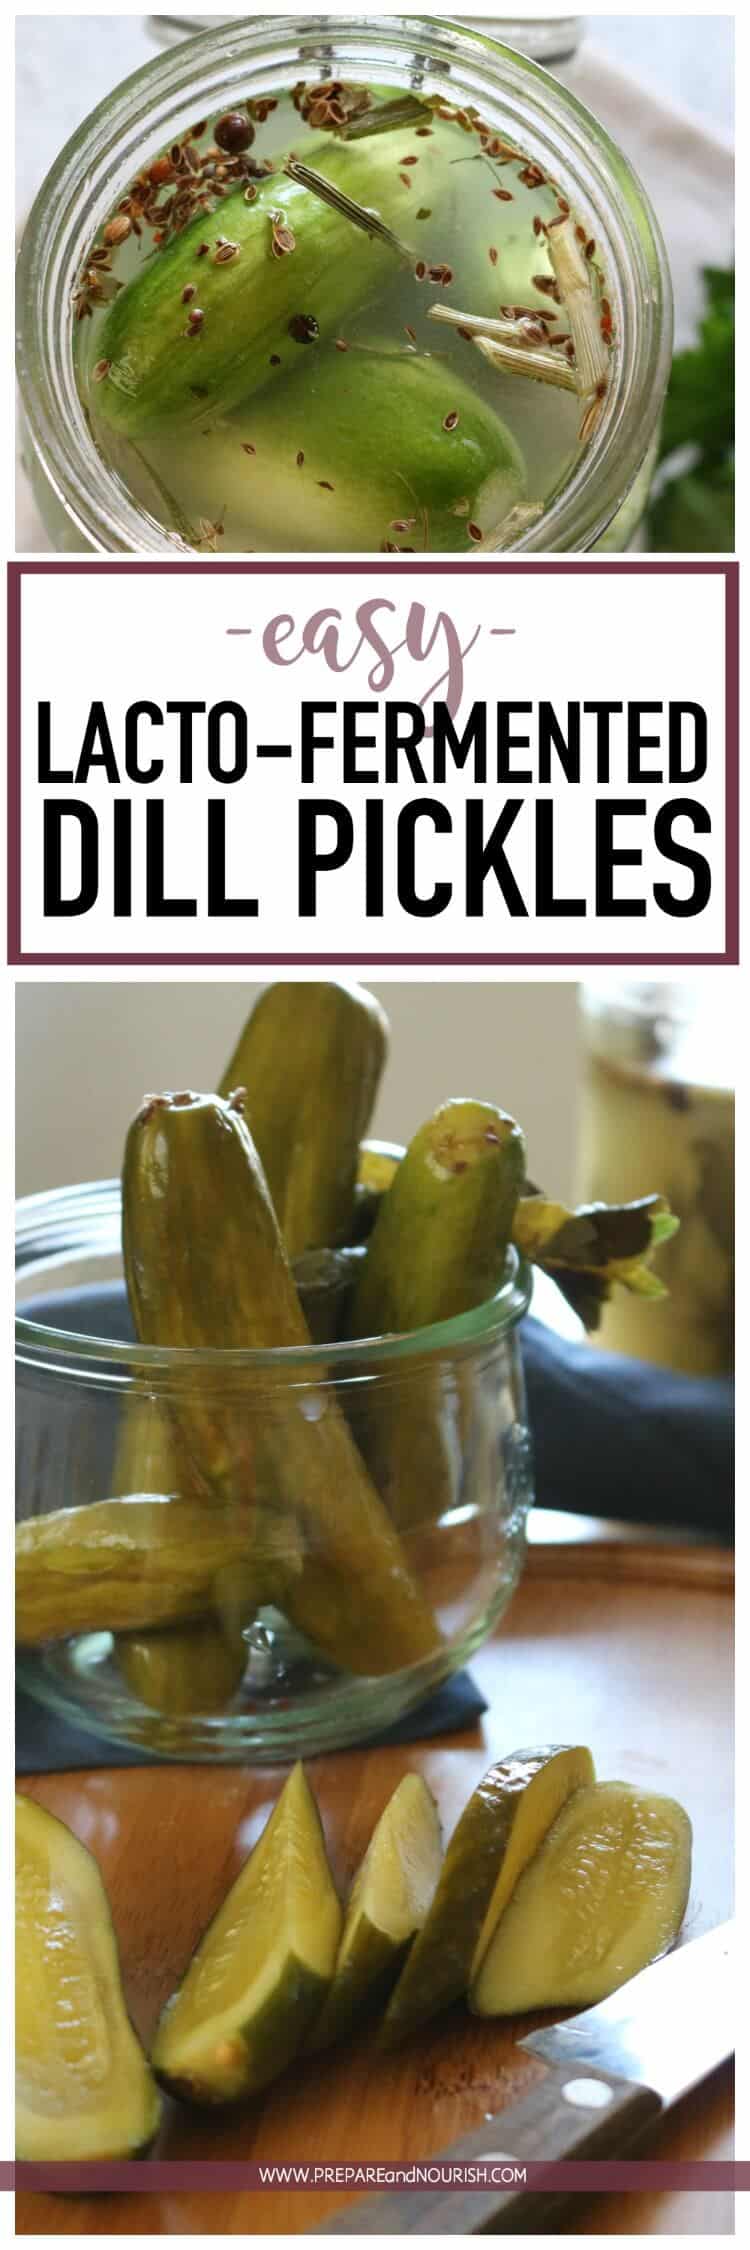 Easy Lacto-Fermented Dill Pickles -These Easy Lacto-Fermented Dill Pickles are a great way to preserve those cucumbers naturally with live enzymes and probiotics. It's originally made with dill and garlic, but you can add your favorite spices to this easy ferment. #paleo #lowcarb #ferment